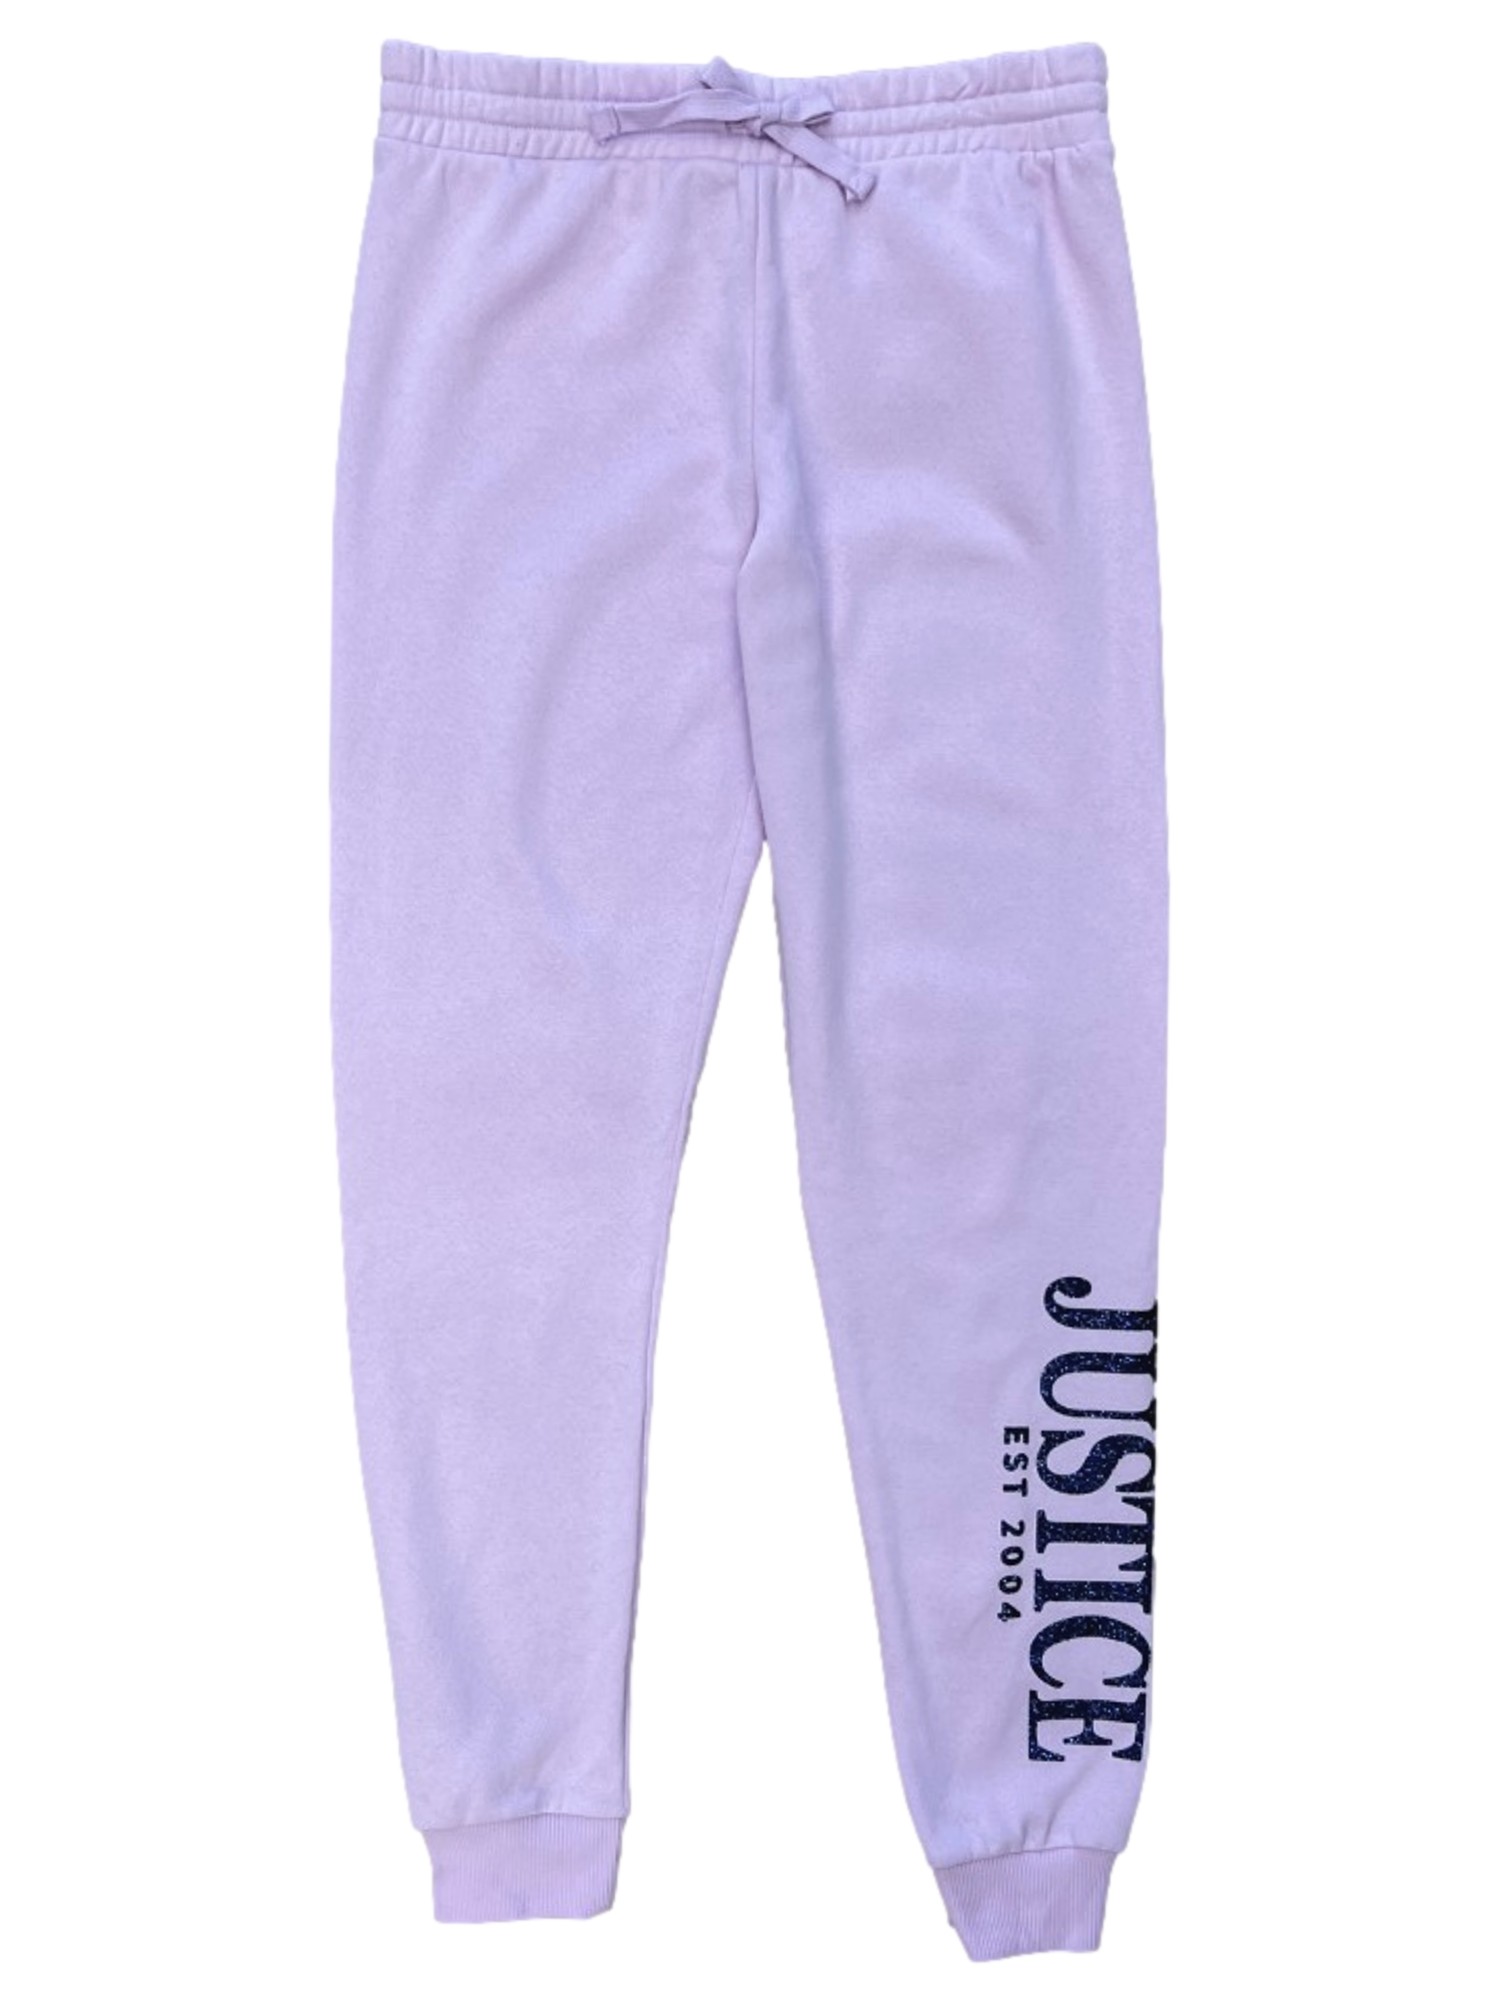 Justice Girls Pink With Glue Glitter Jogger Sweatpants With Drawstring L (12-14)